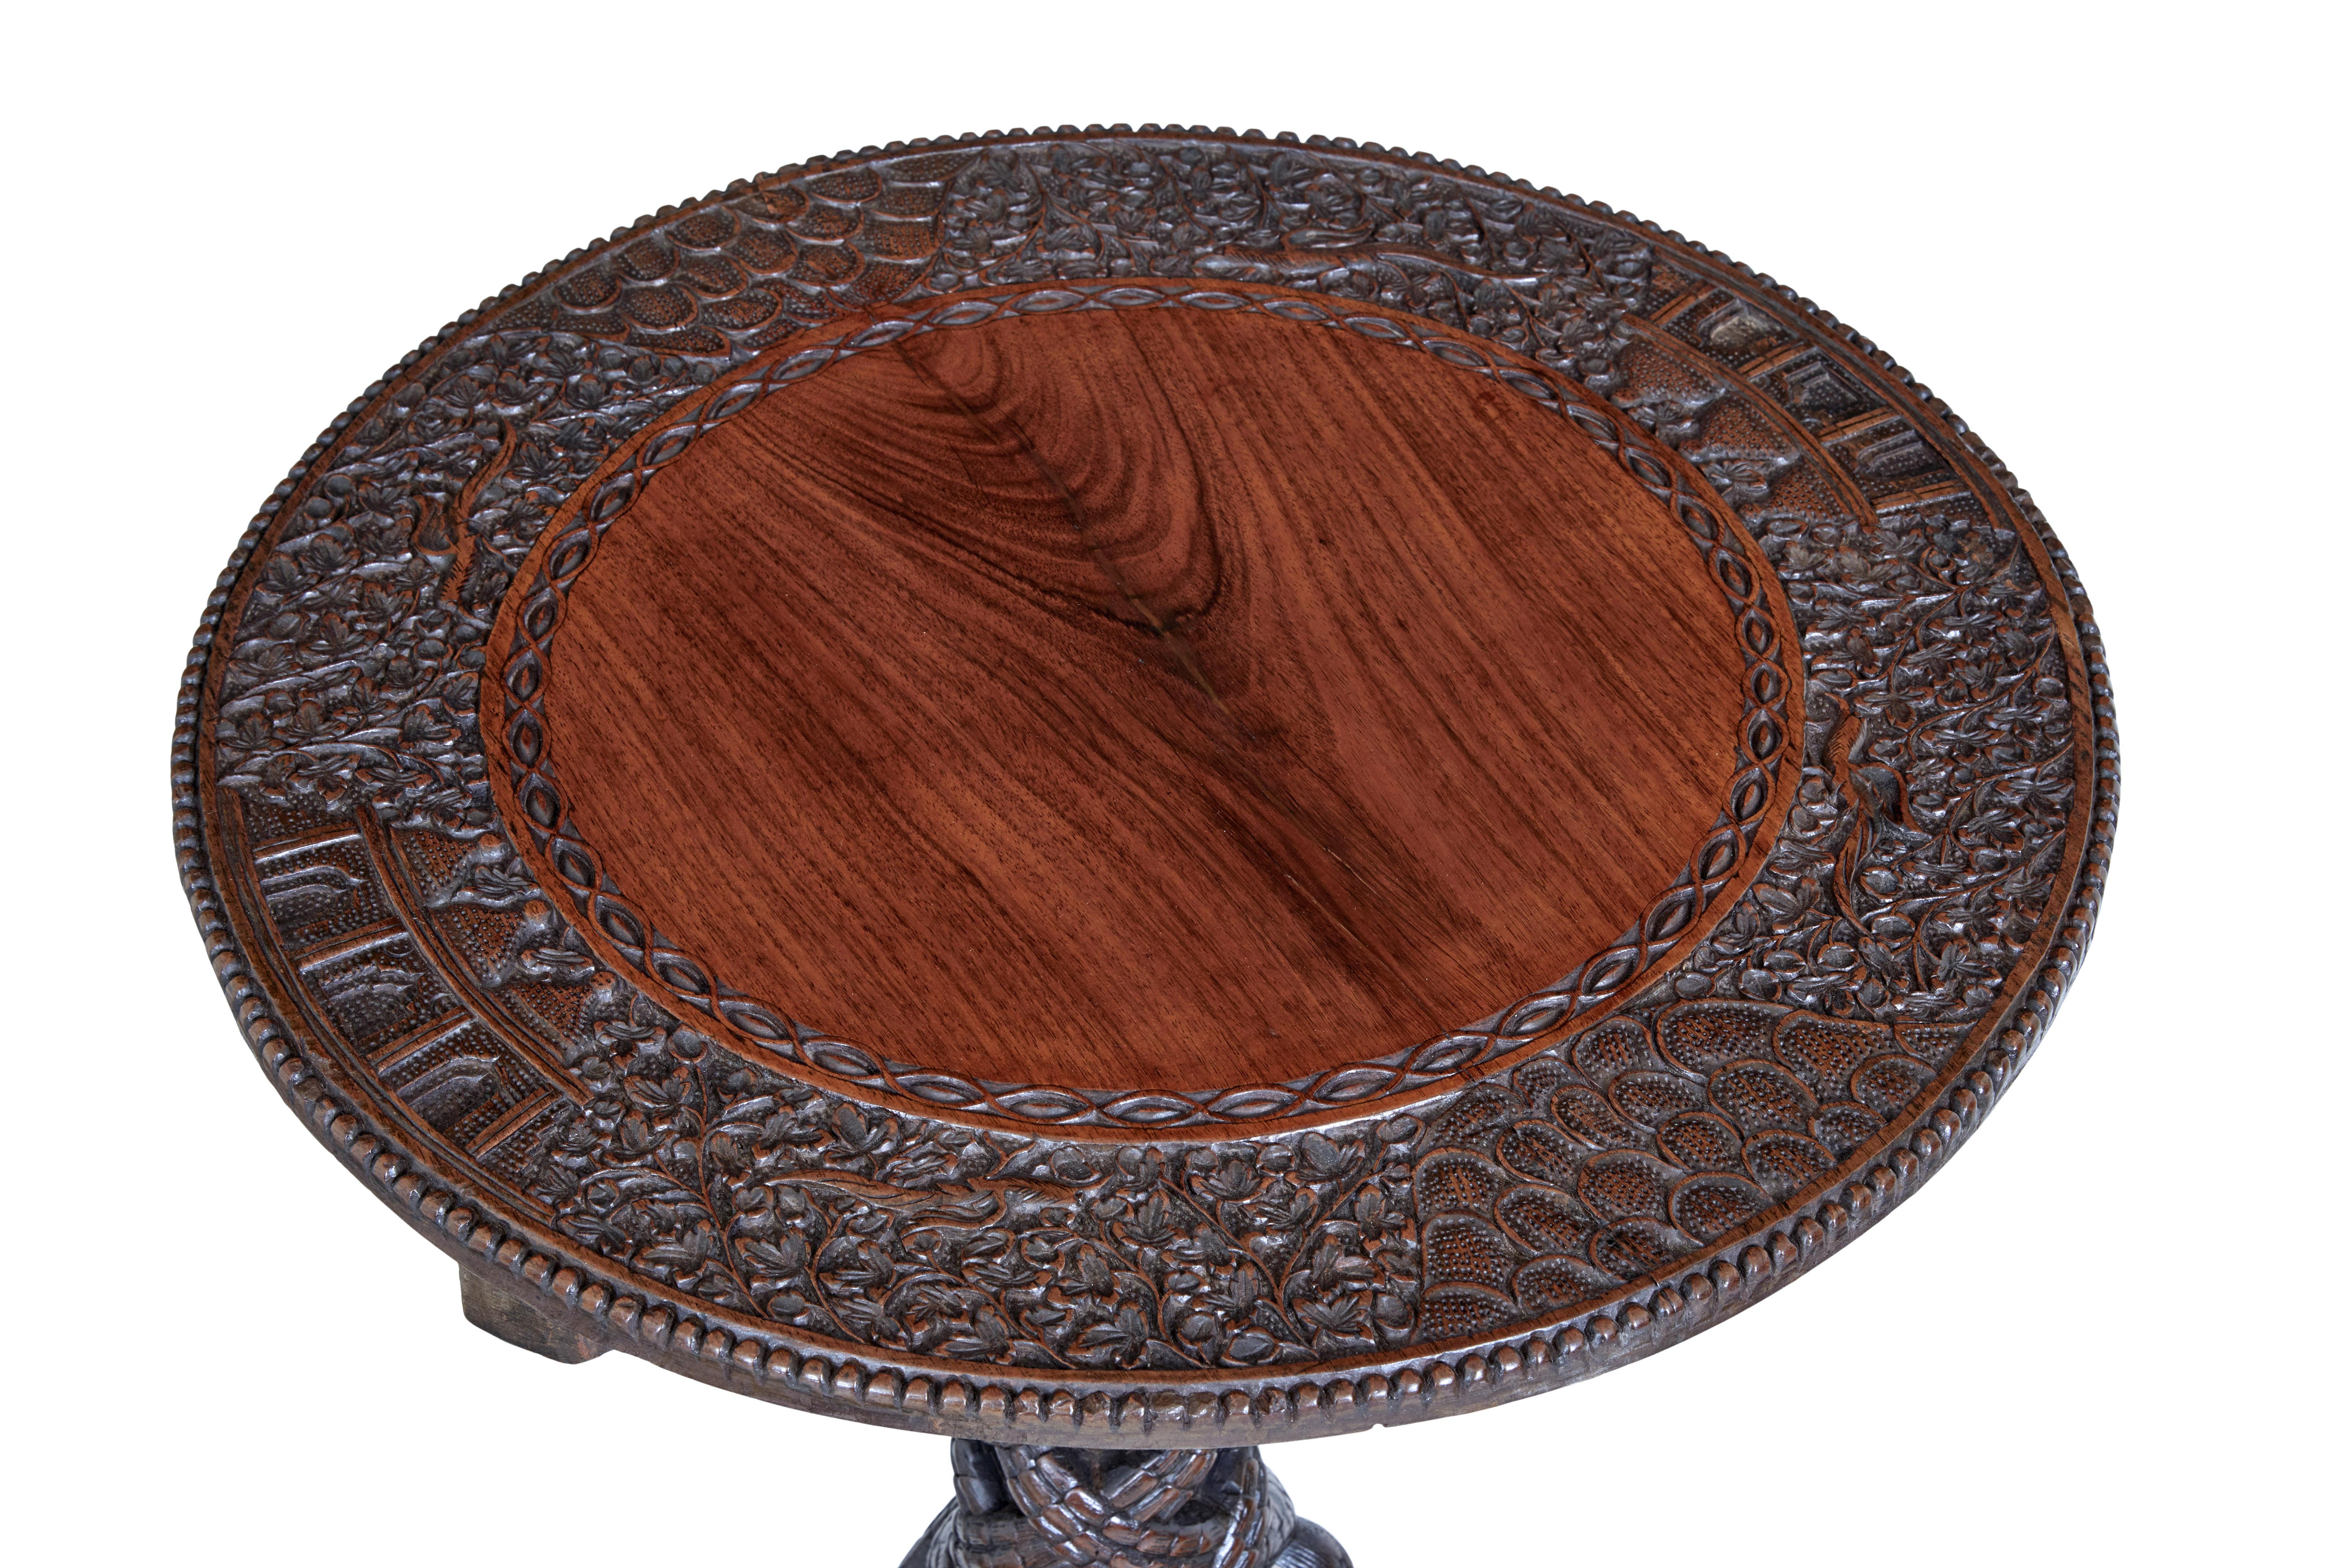 Good quality Burmese / Anglo Indian tilt top table, circa 1880.

Circular top with a carved border of birds, foliage and architecture. Tilting top, which leads down to the carved tripod base. Carved birds and dogs adorn the feet. Age splits to top